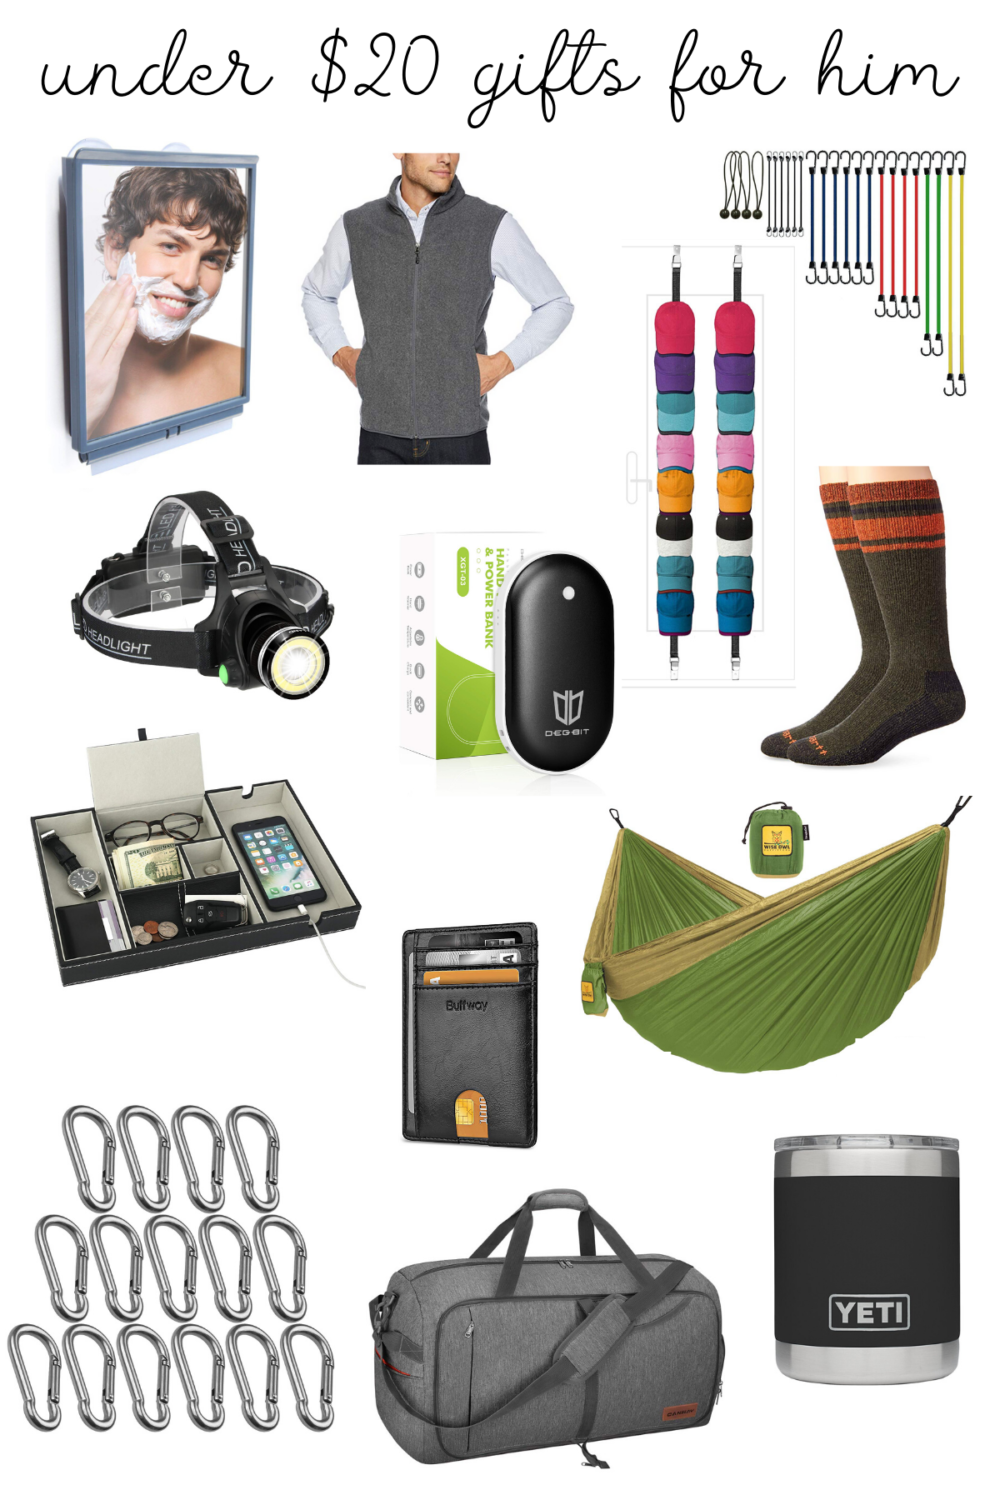 20 gifts under 20 bucks!  20 gifts, Gifts for him, Inspirational